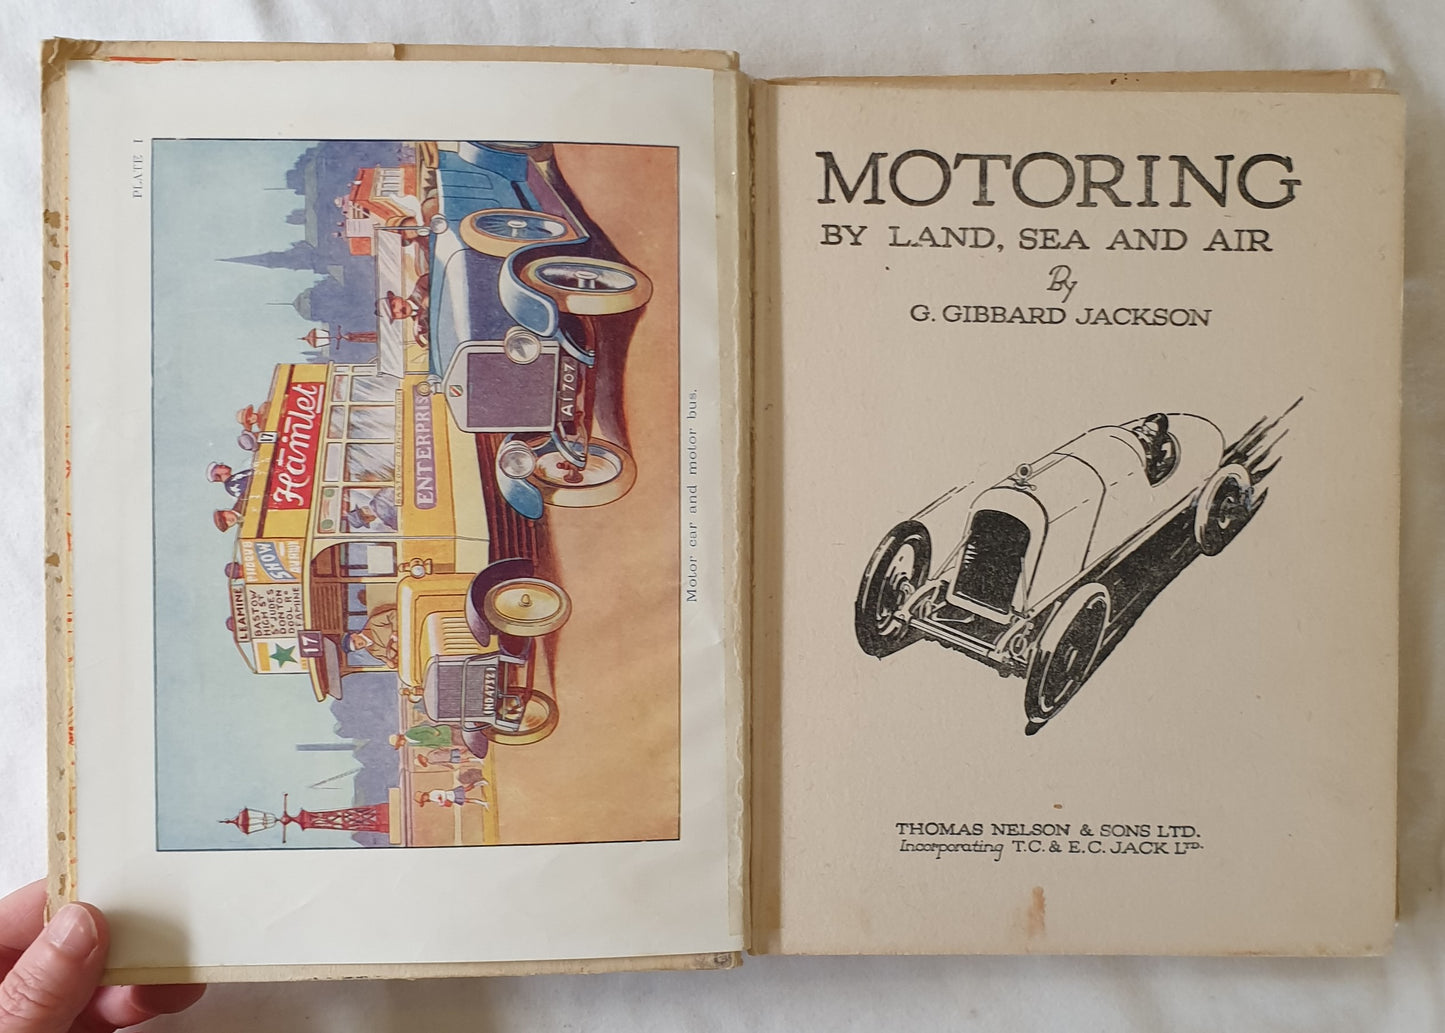 Motoring By Land, Sea and Air by G. Gibbard Jackson